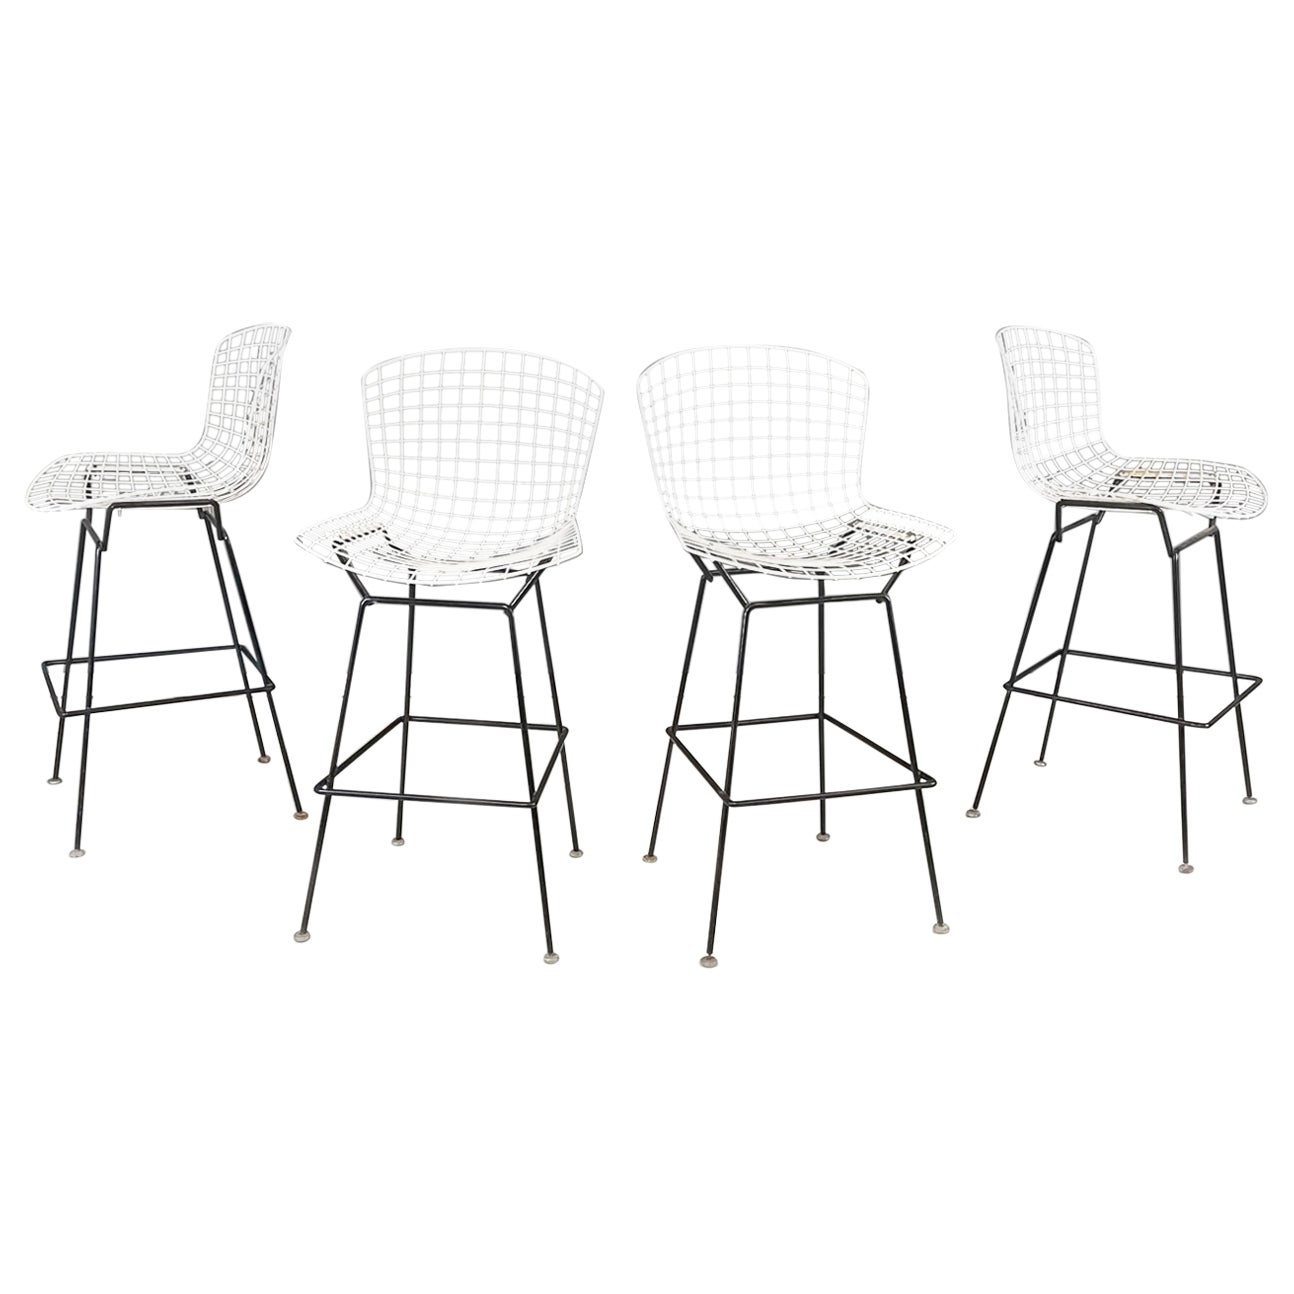 American Midcentury Black White Metal High Stools by Bertoia for Knoll, 1960s For Sale